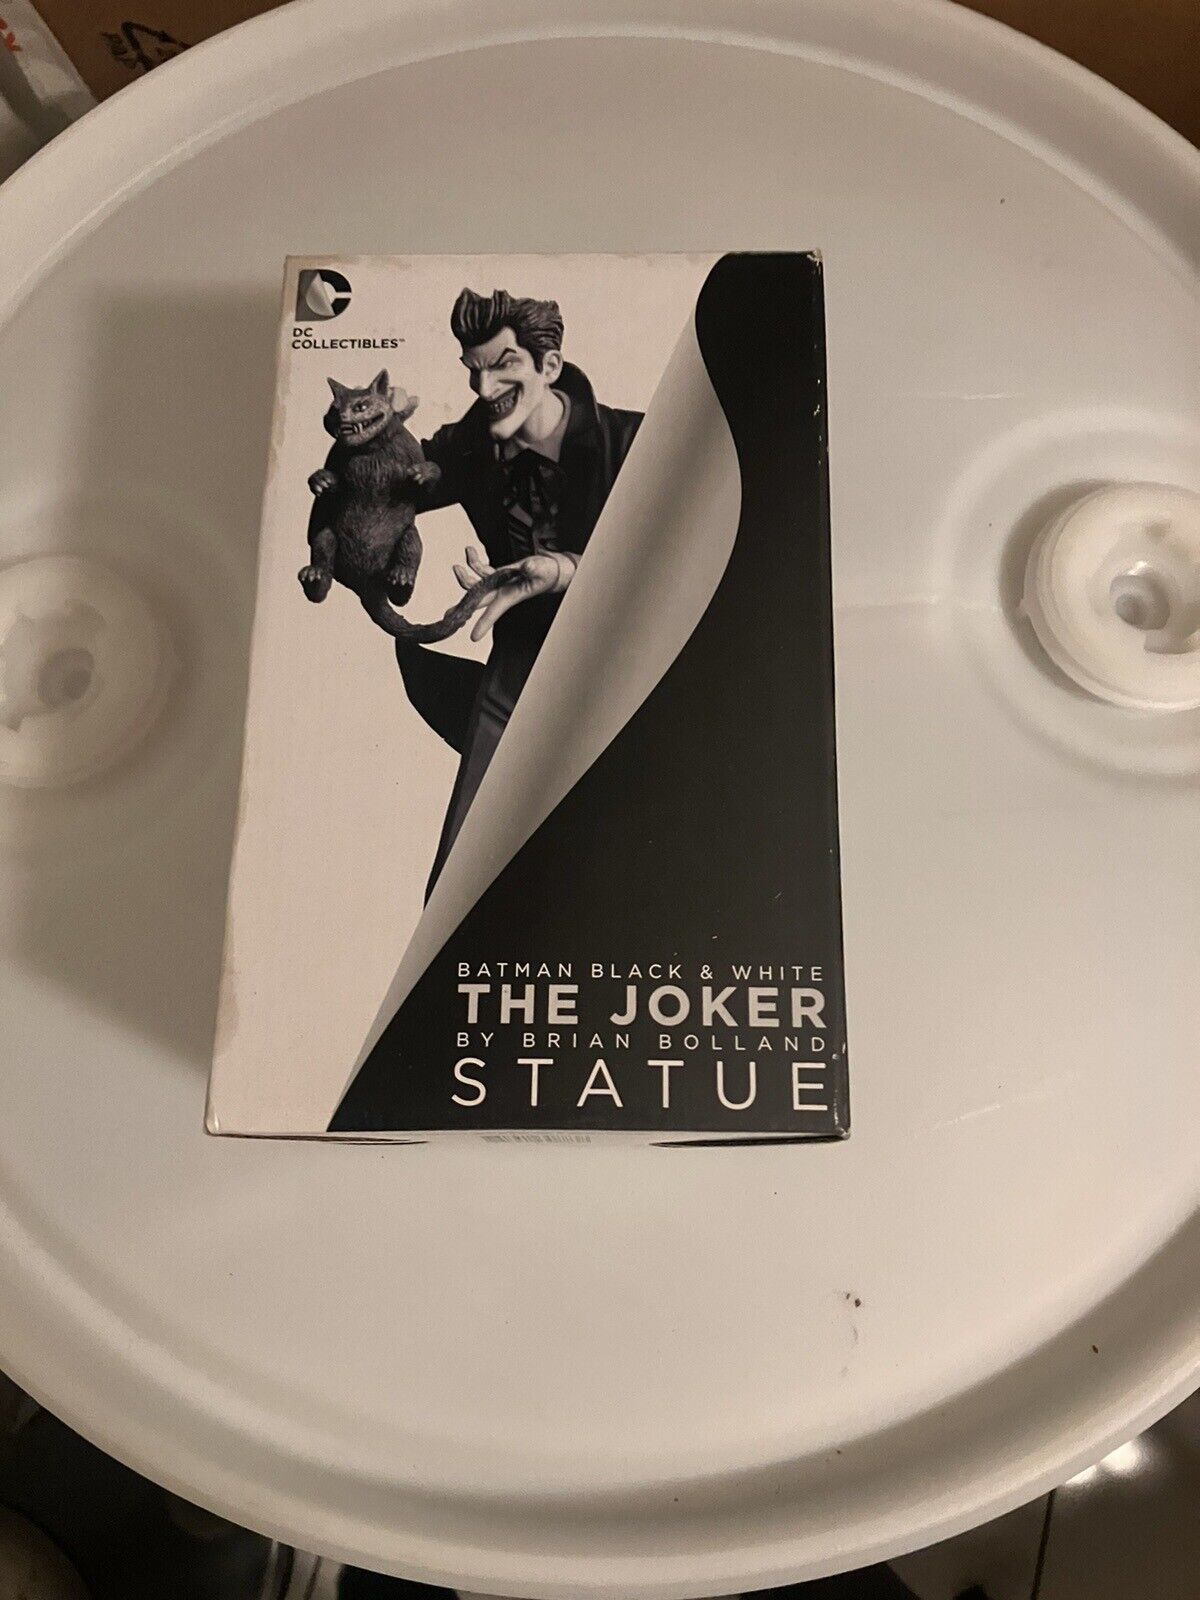 THE JOKER Batman Black & White Statue by Brian Bolland DC Collectibles New